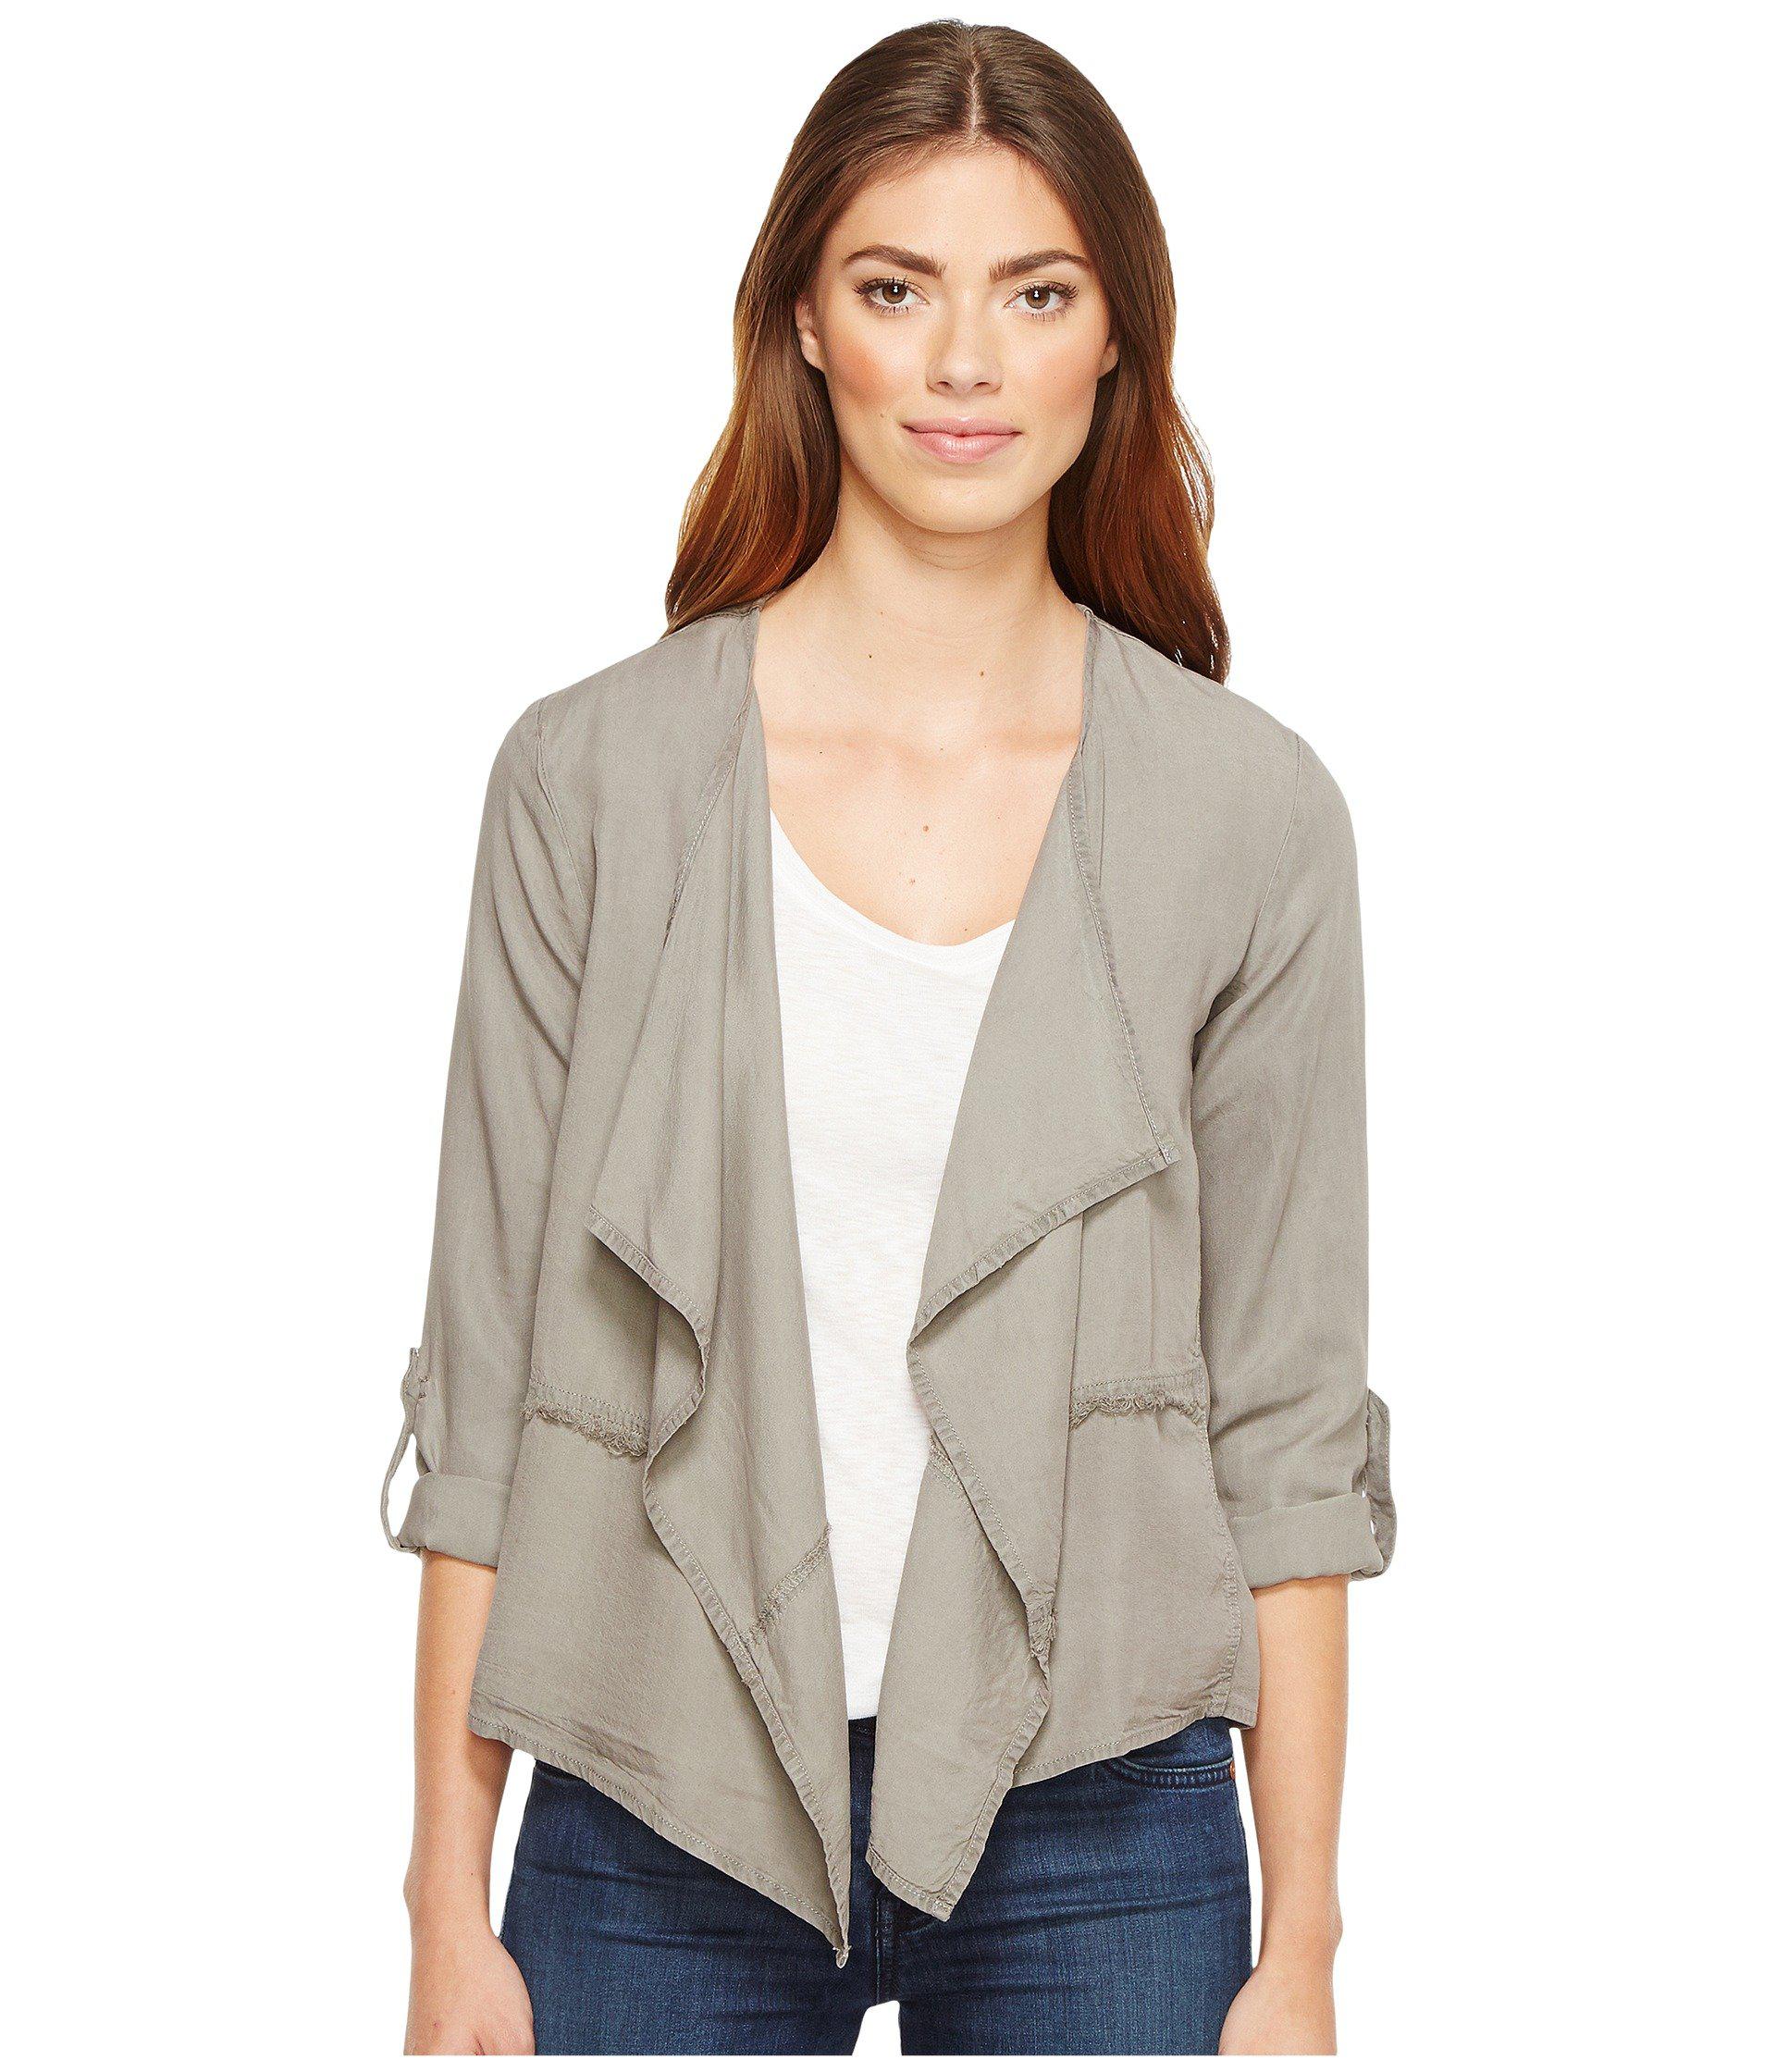 Lyst - Mod-O-Doc Chambray Roll-up Sleeve Drapey Jacket in Gray - Save 43%